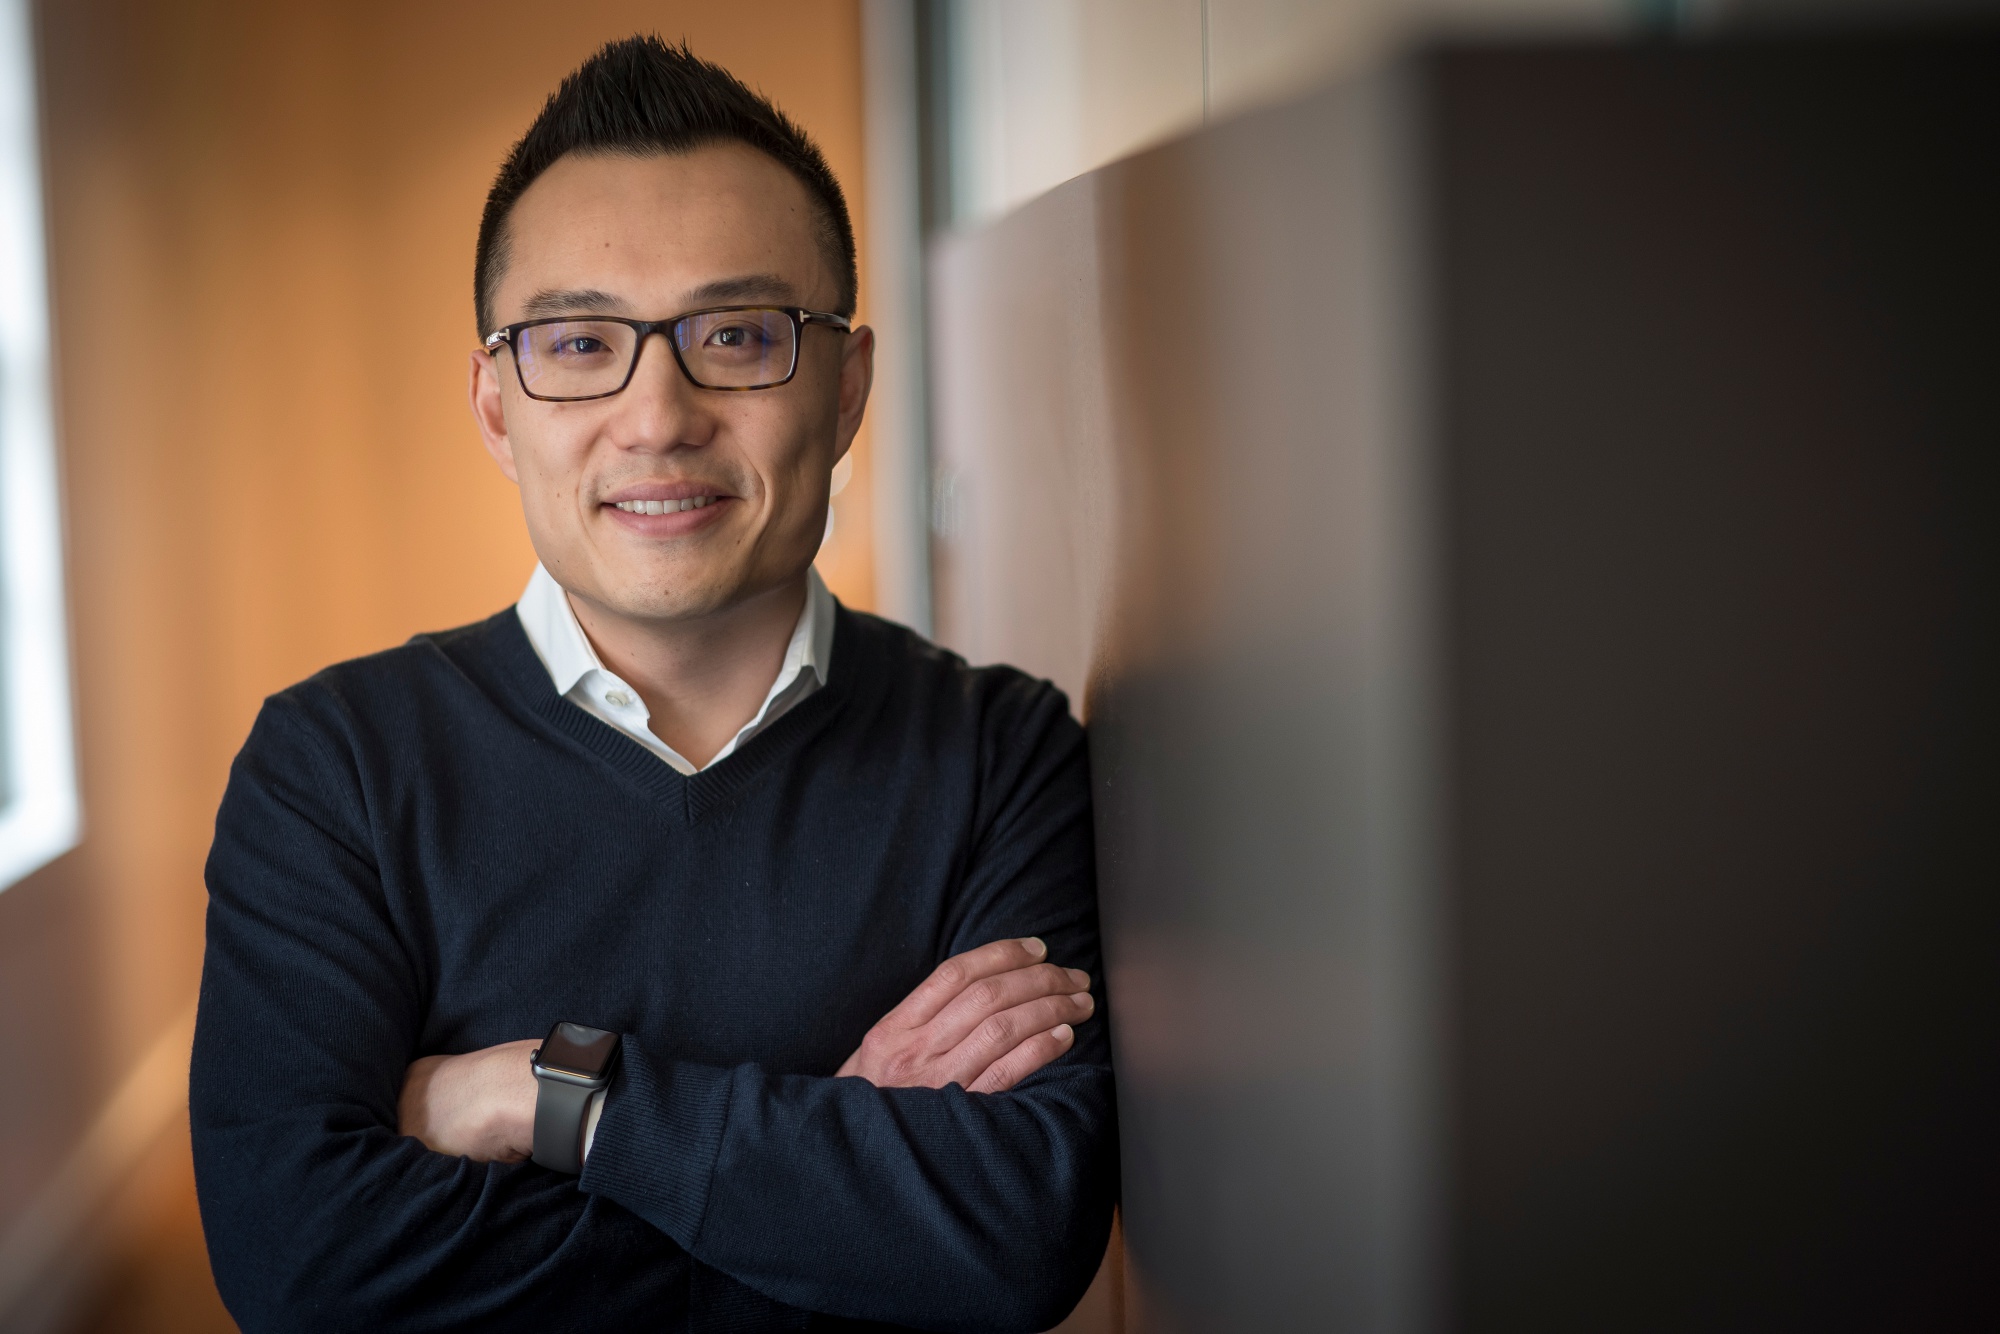 Tony Xu, co-founder and chief executive officer of DoorDash Inc.